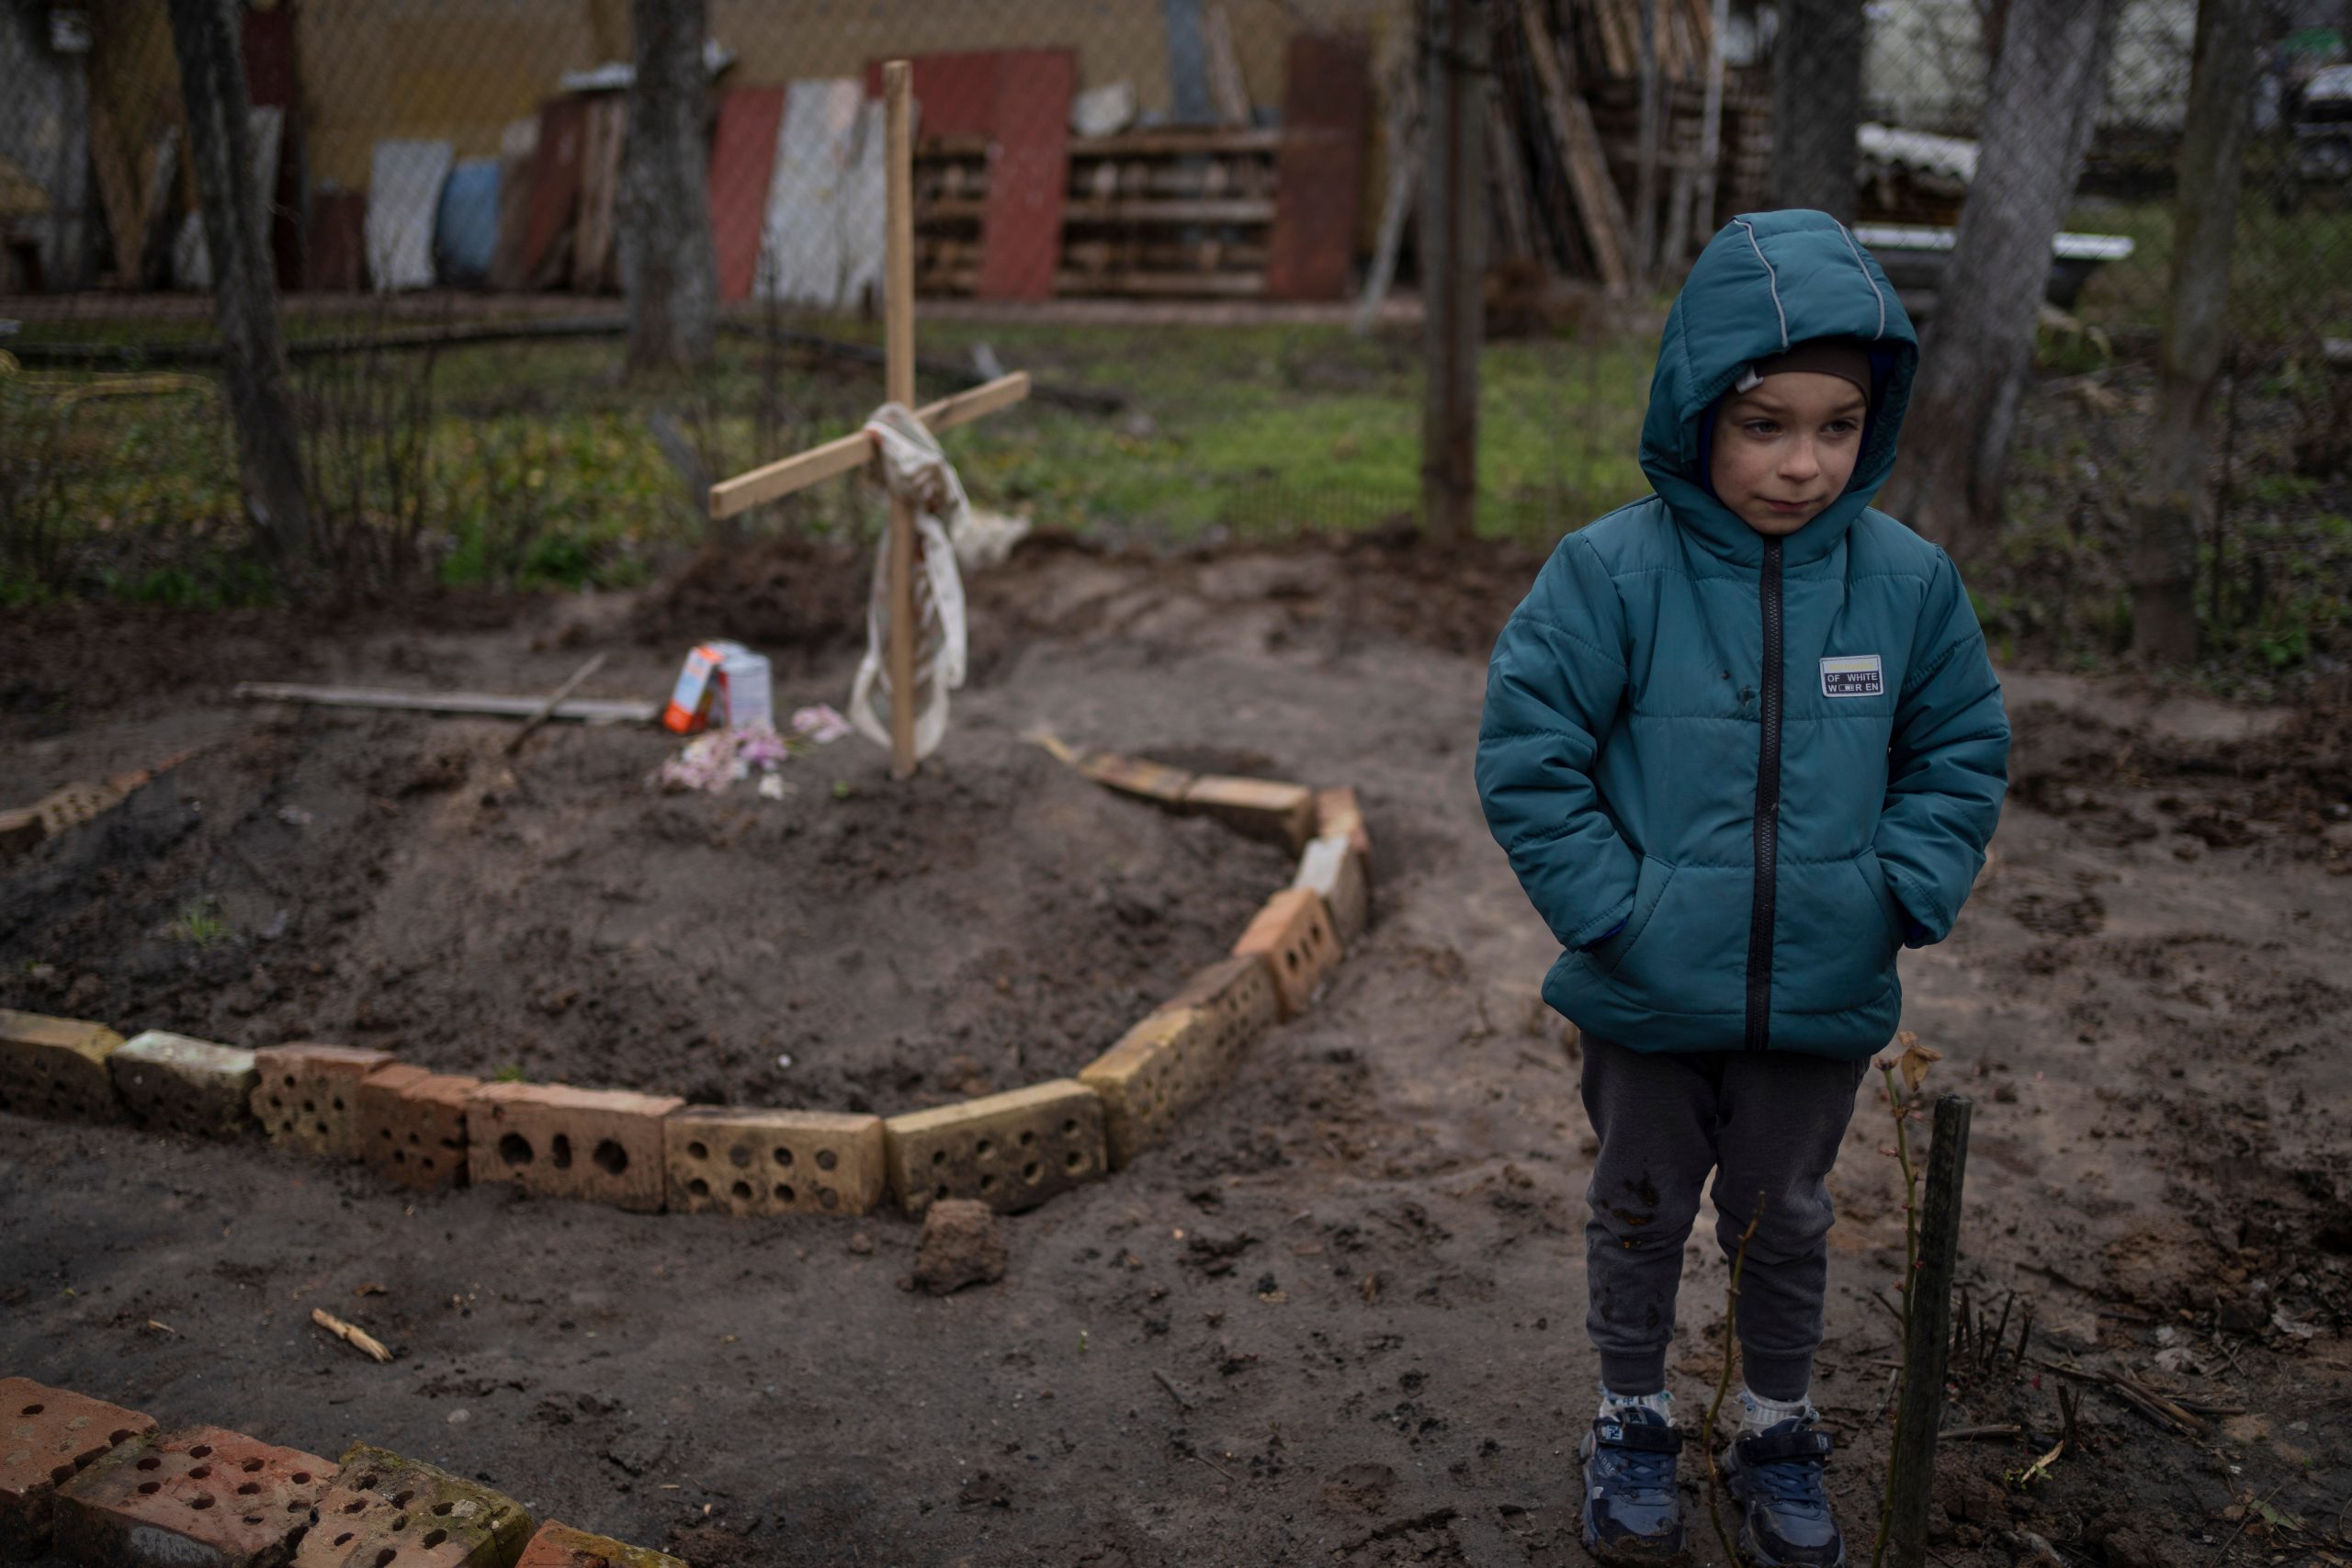 Its not the end: Story of the children who survived Russia’s attack on Bucha